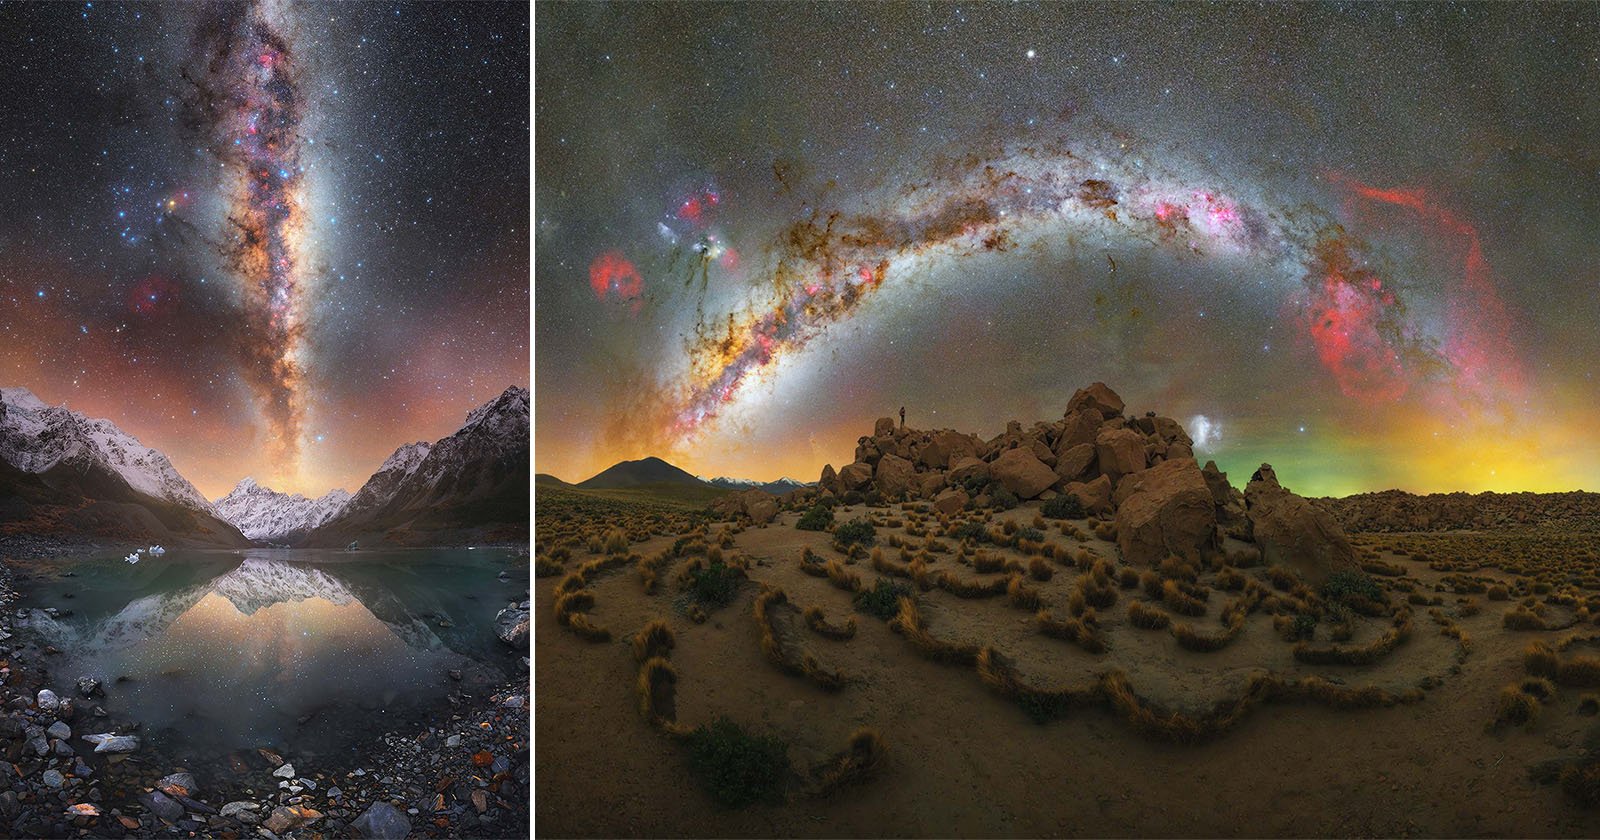 Split image of night skies. Left: A bright, colorful Milky Way over snow-covered mountains and a reflective lake. Right: The Milky Way forming an arch over a rocky desert landscape with sparse vegetation. Both scenes are vibrant with starlit skies.